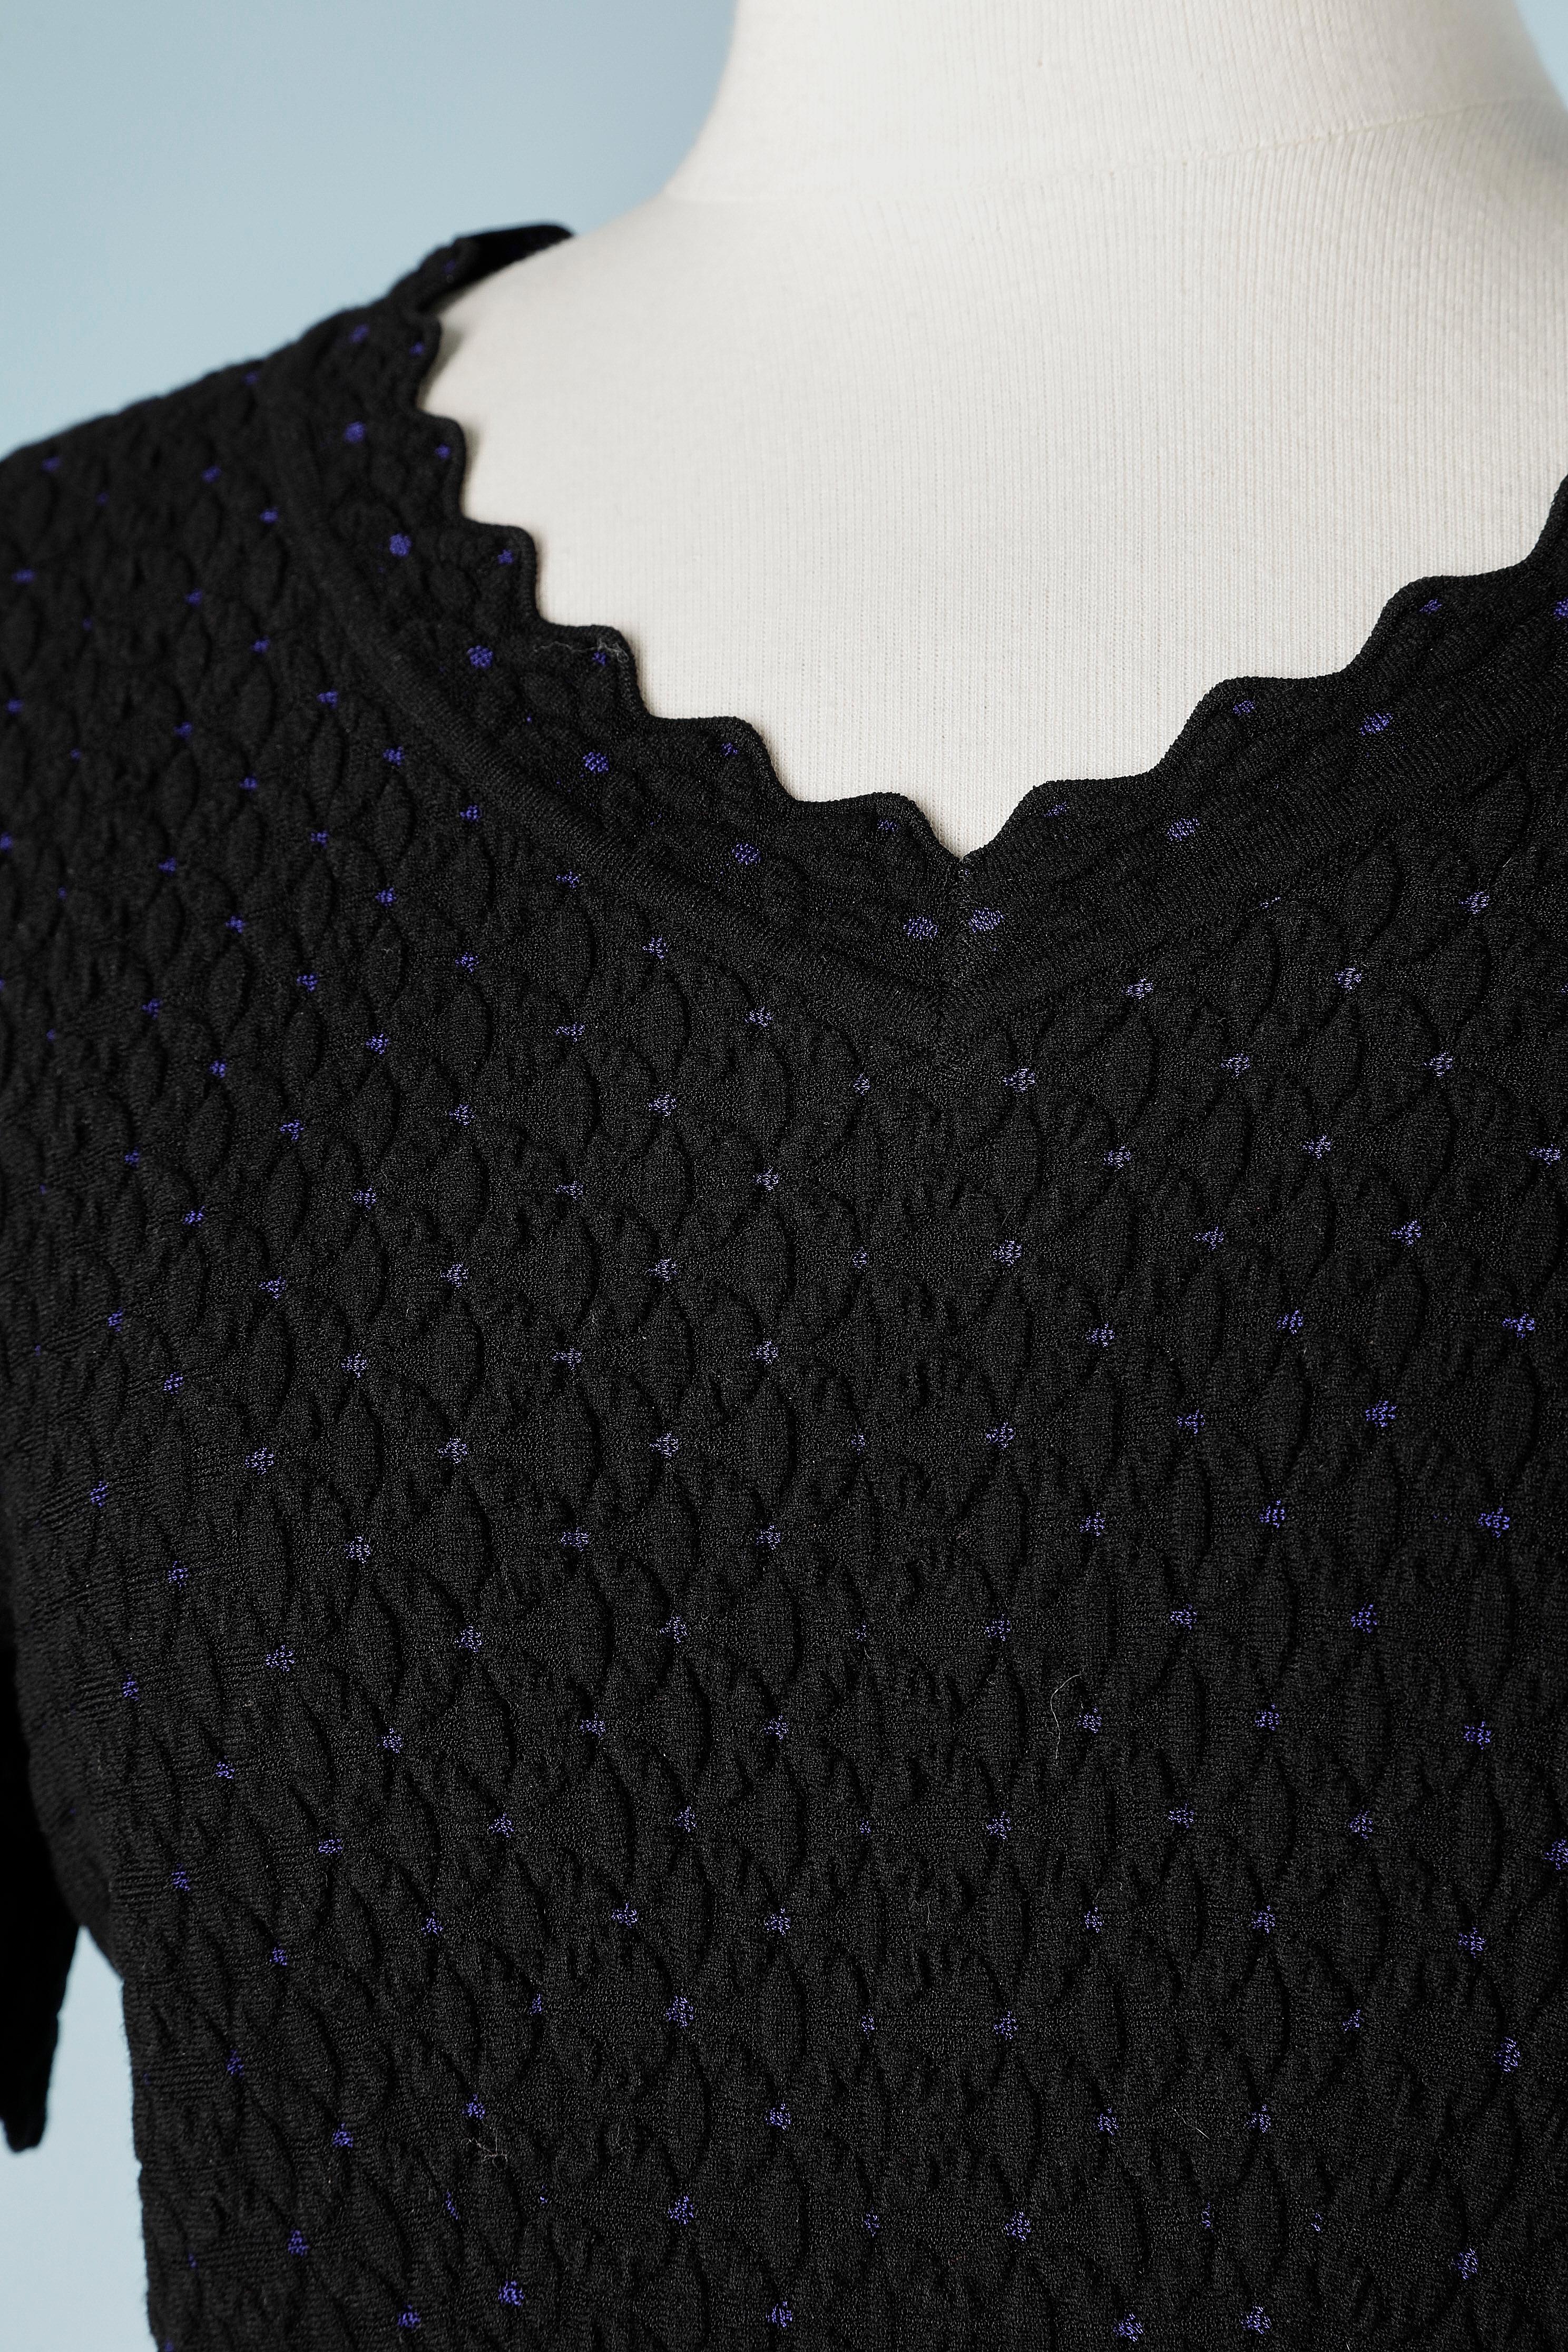 Black jacquard knit dress with short sleeves. Tiny touch of blue.
Zip in the middle back. 
SIZE 42 (It) 38 (Fr) M 